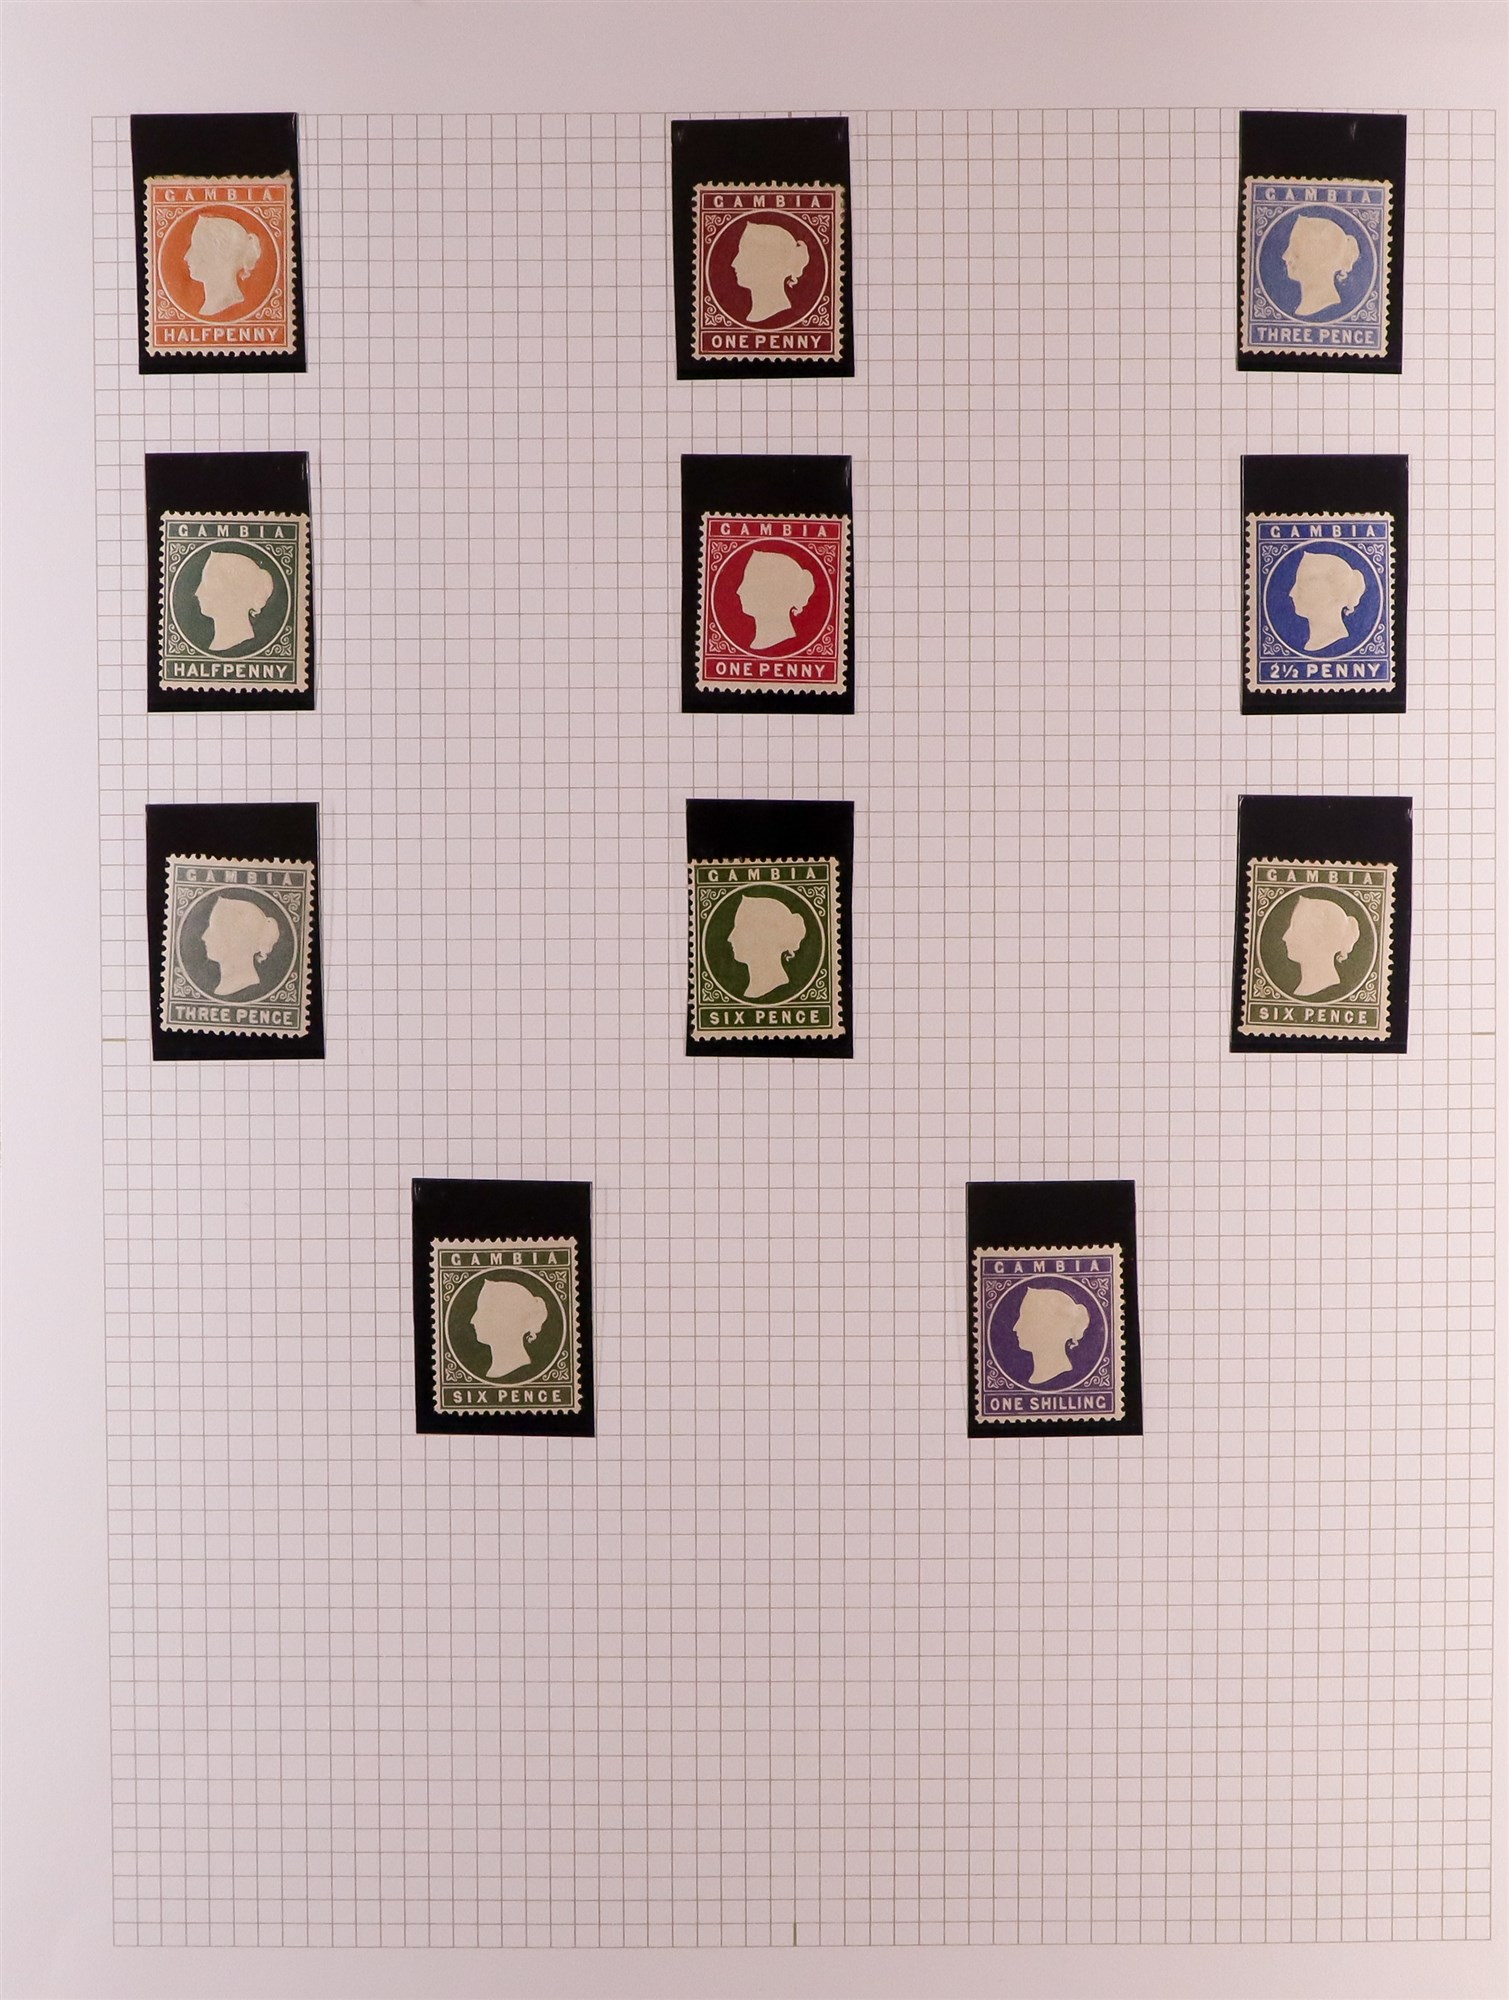 GAMBIA 1880 - 1935 COLLECTION incl. various Cameo issues mint, 1s violet used strip 3, 1902-05 set - Image 3 of 15